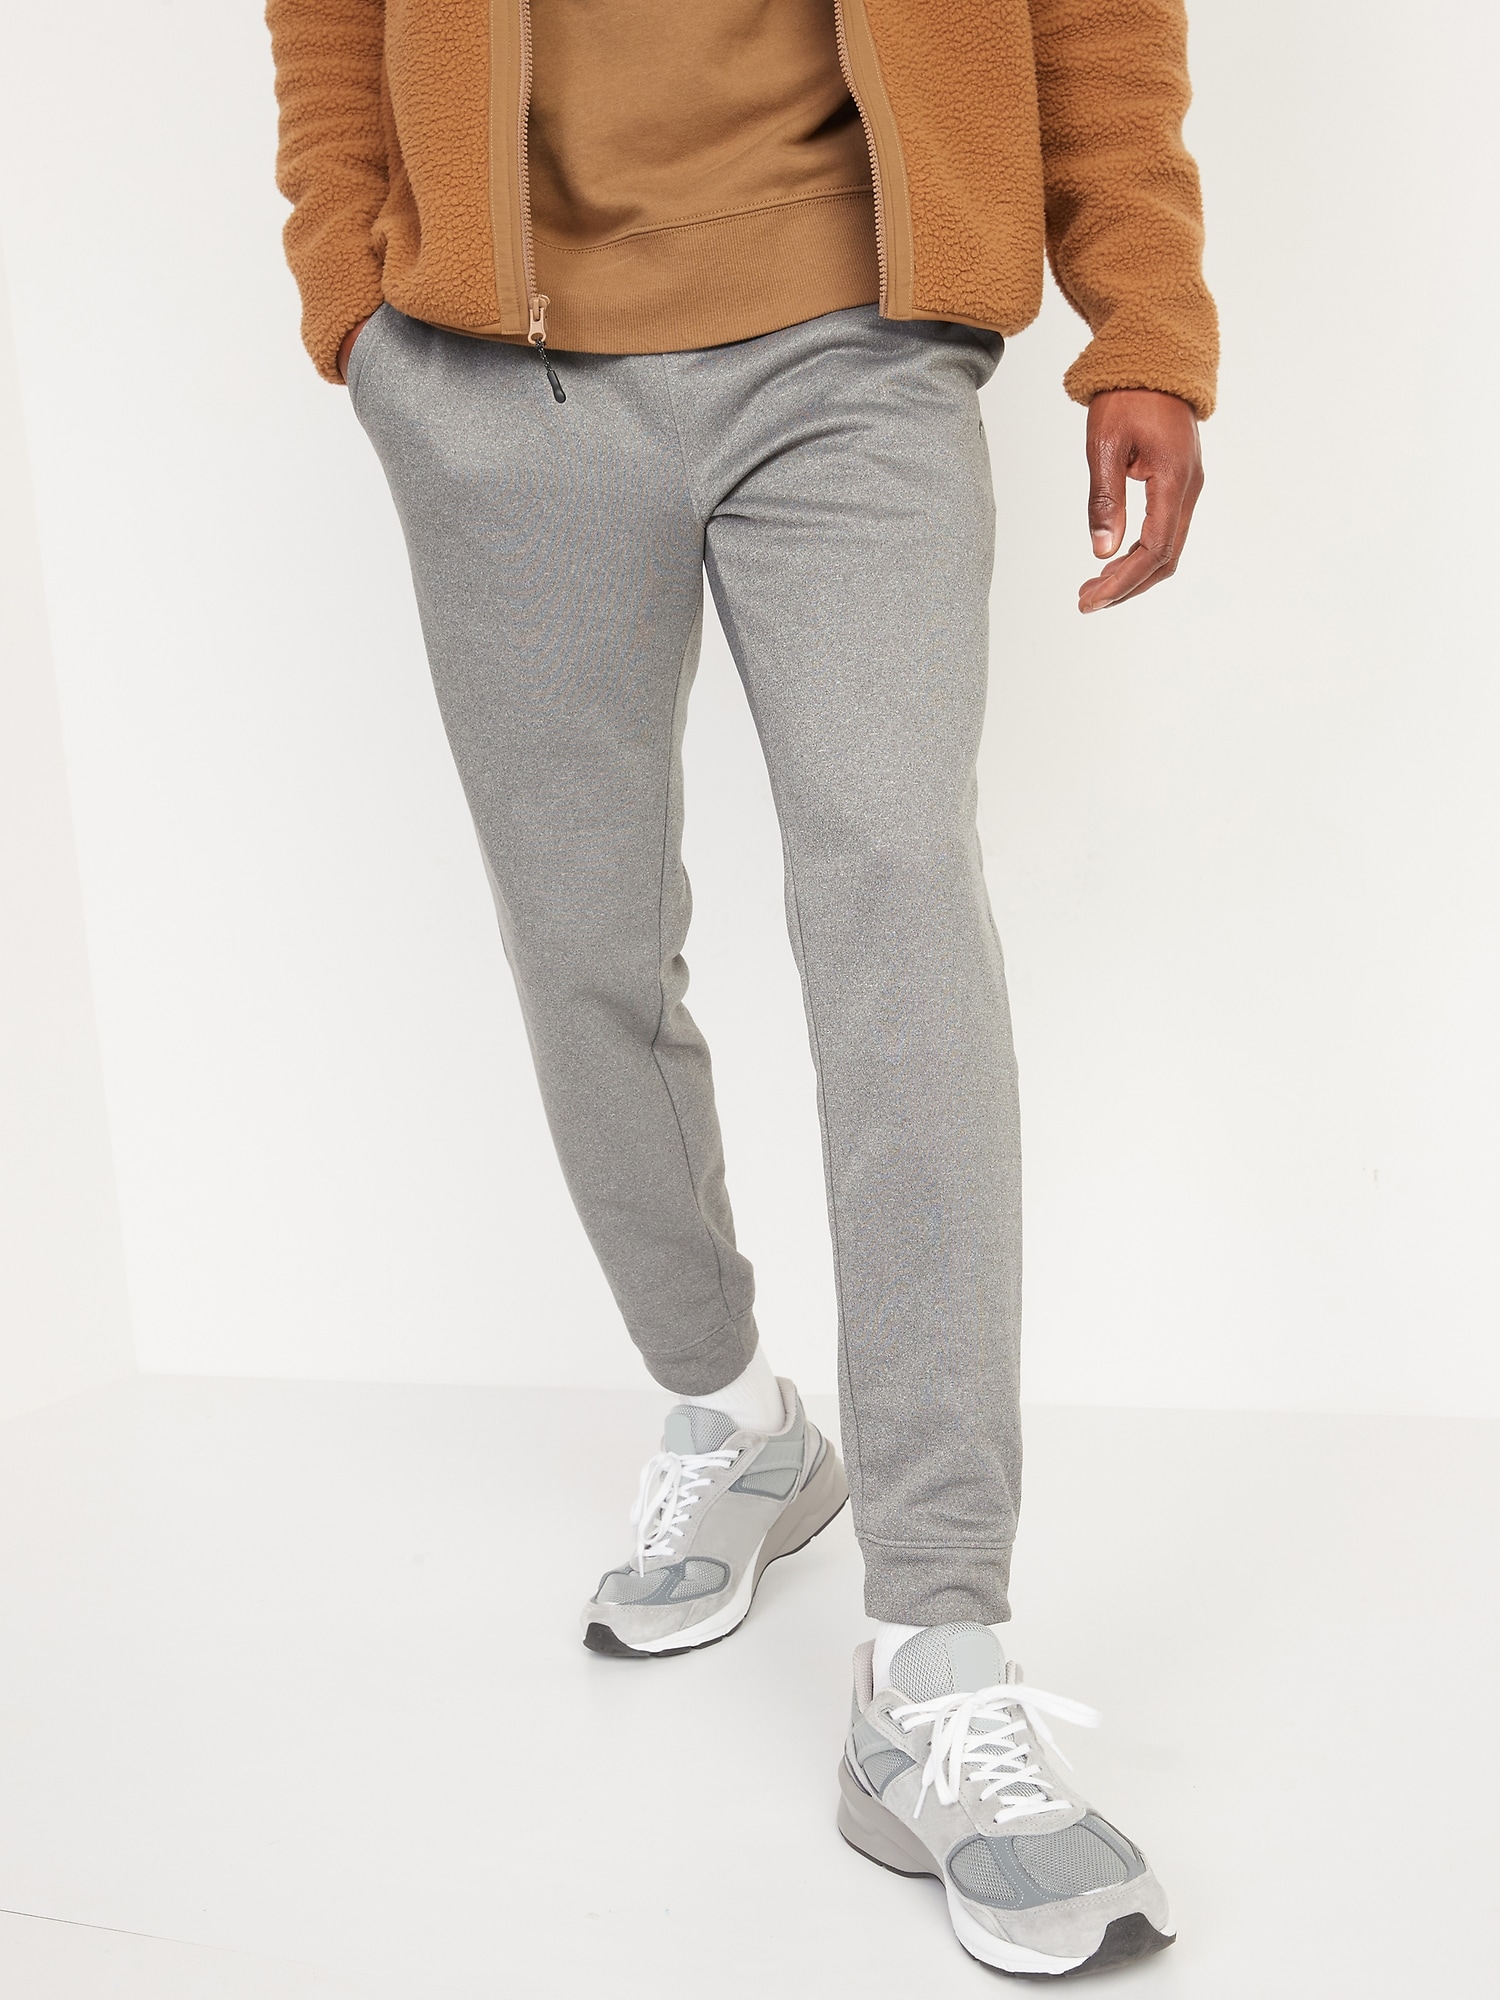 Go-Dry Performance Jogger Sweatpants for Men | Old Navy